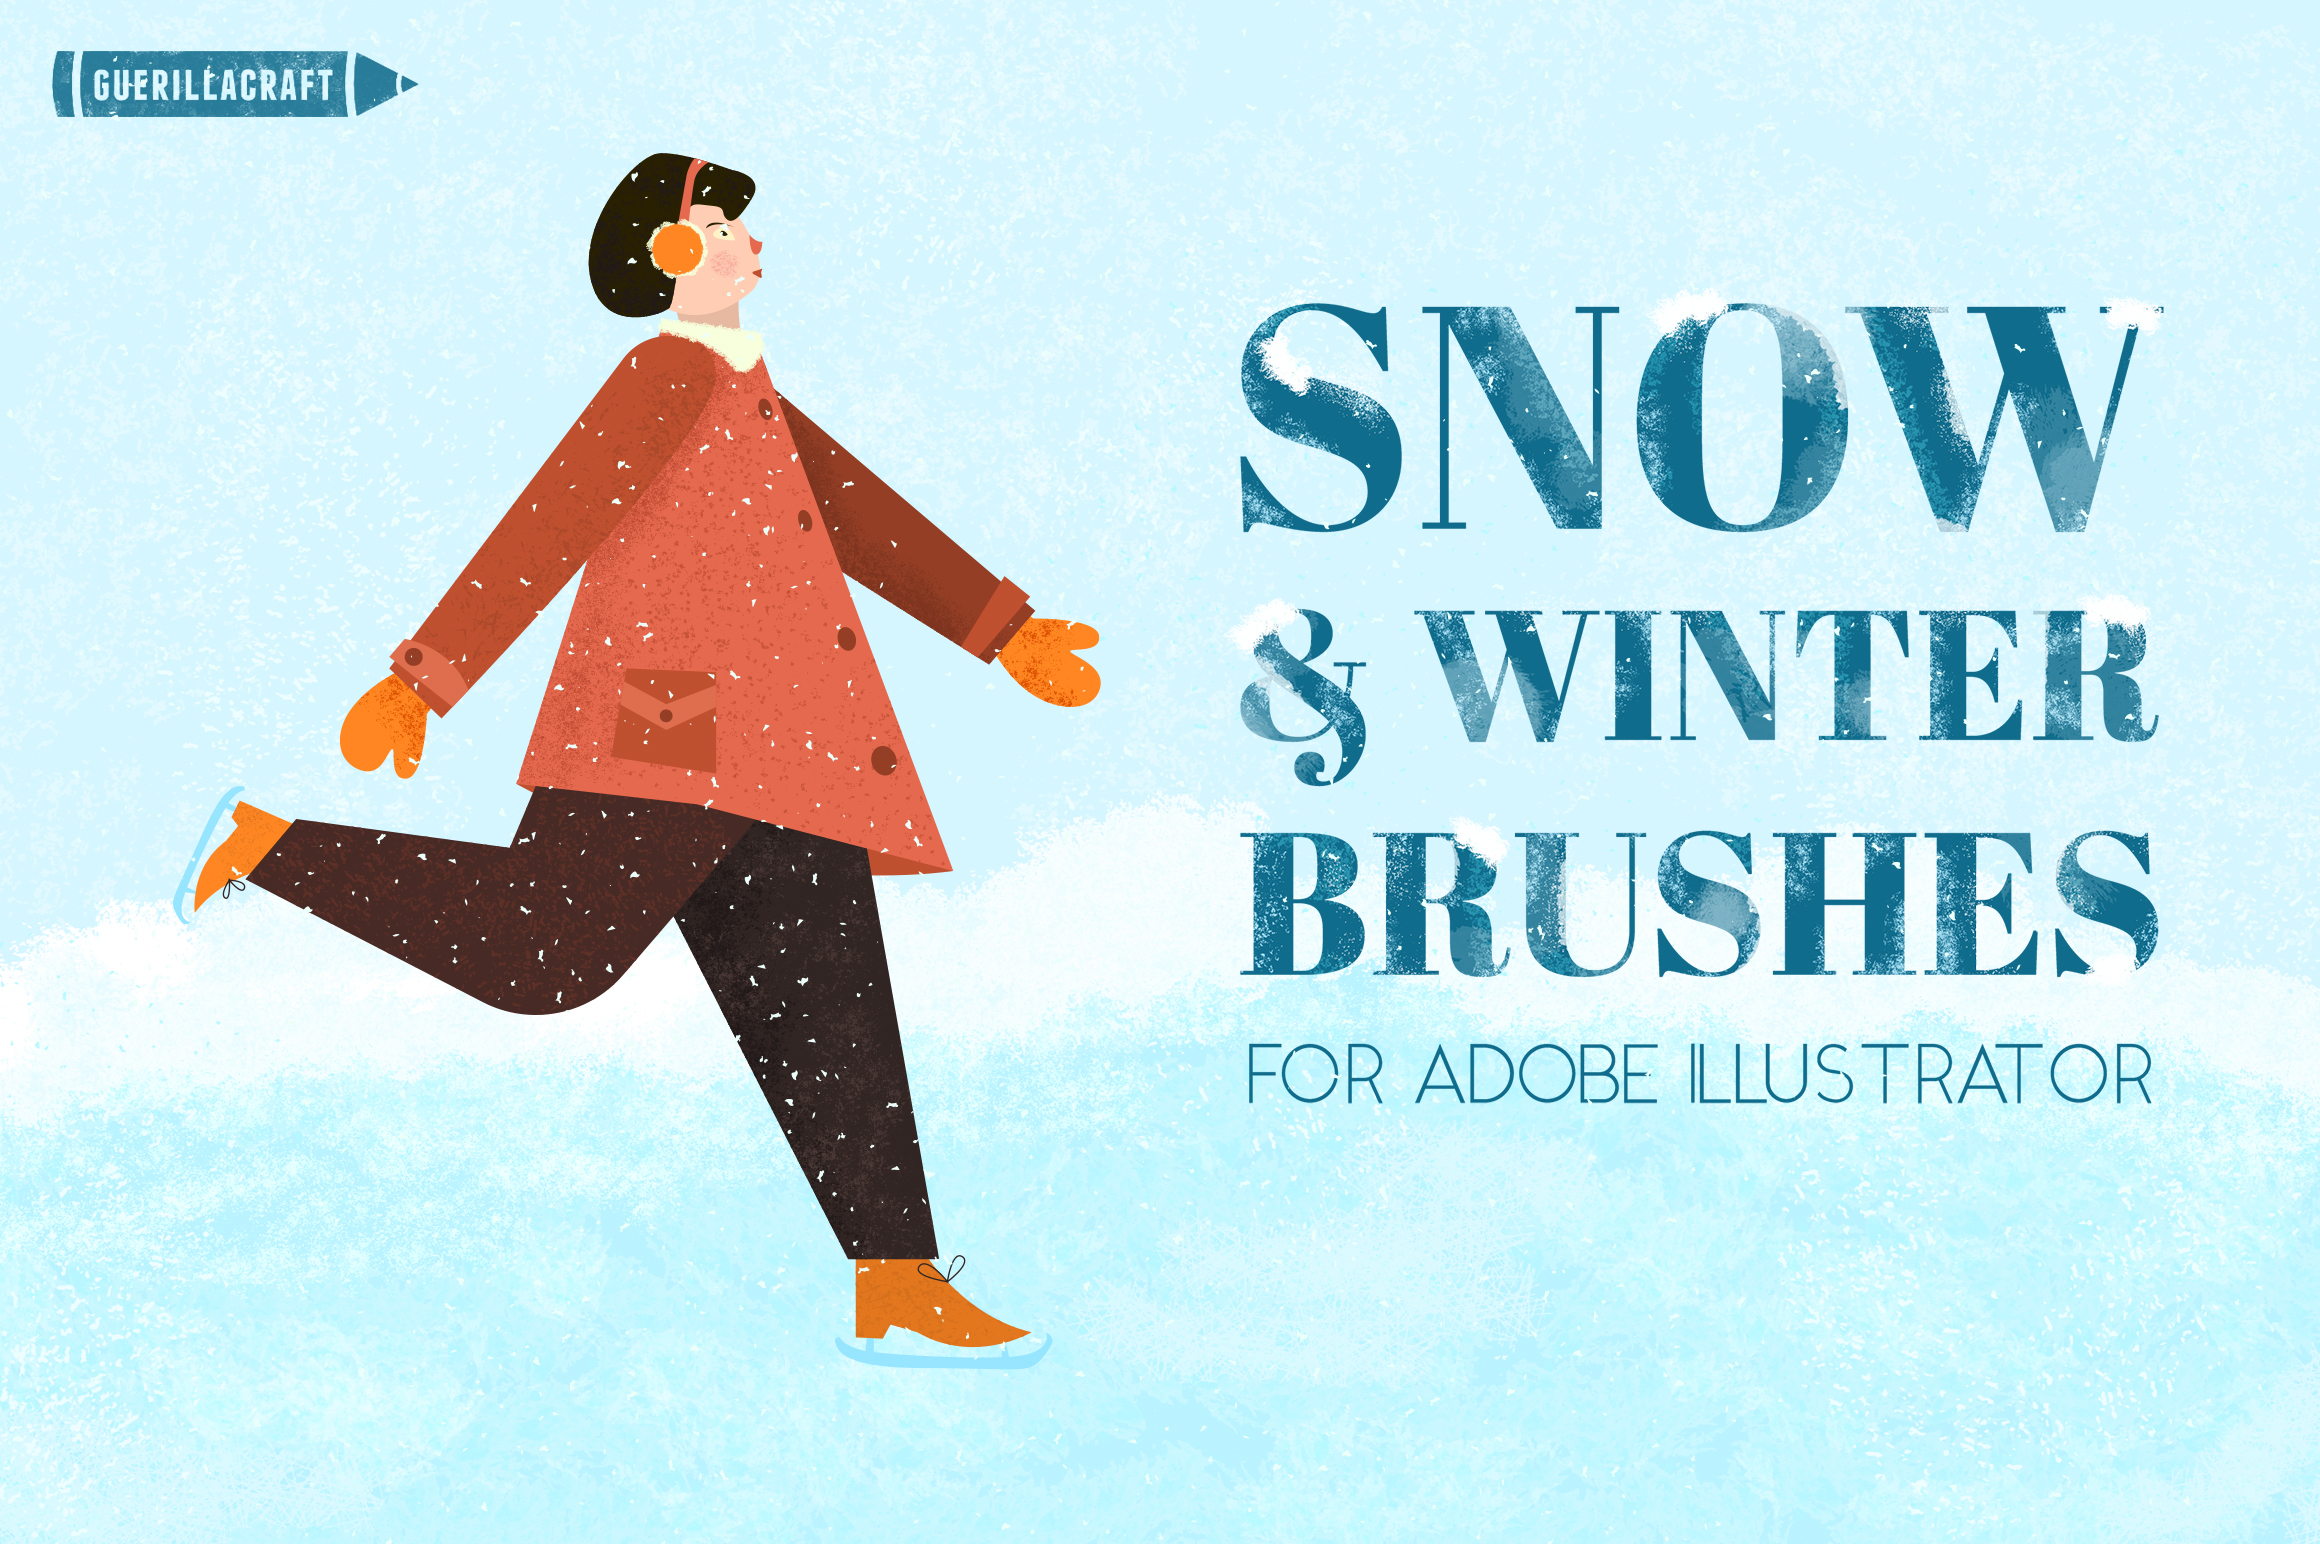 Snow and Winter Brushes for Adobe Illustrator contains 30 powerful brushes for your winter projects.  